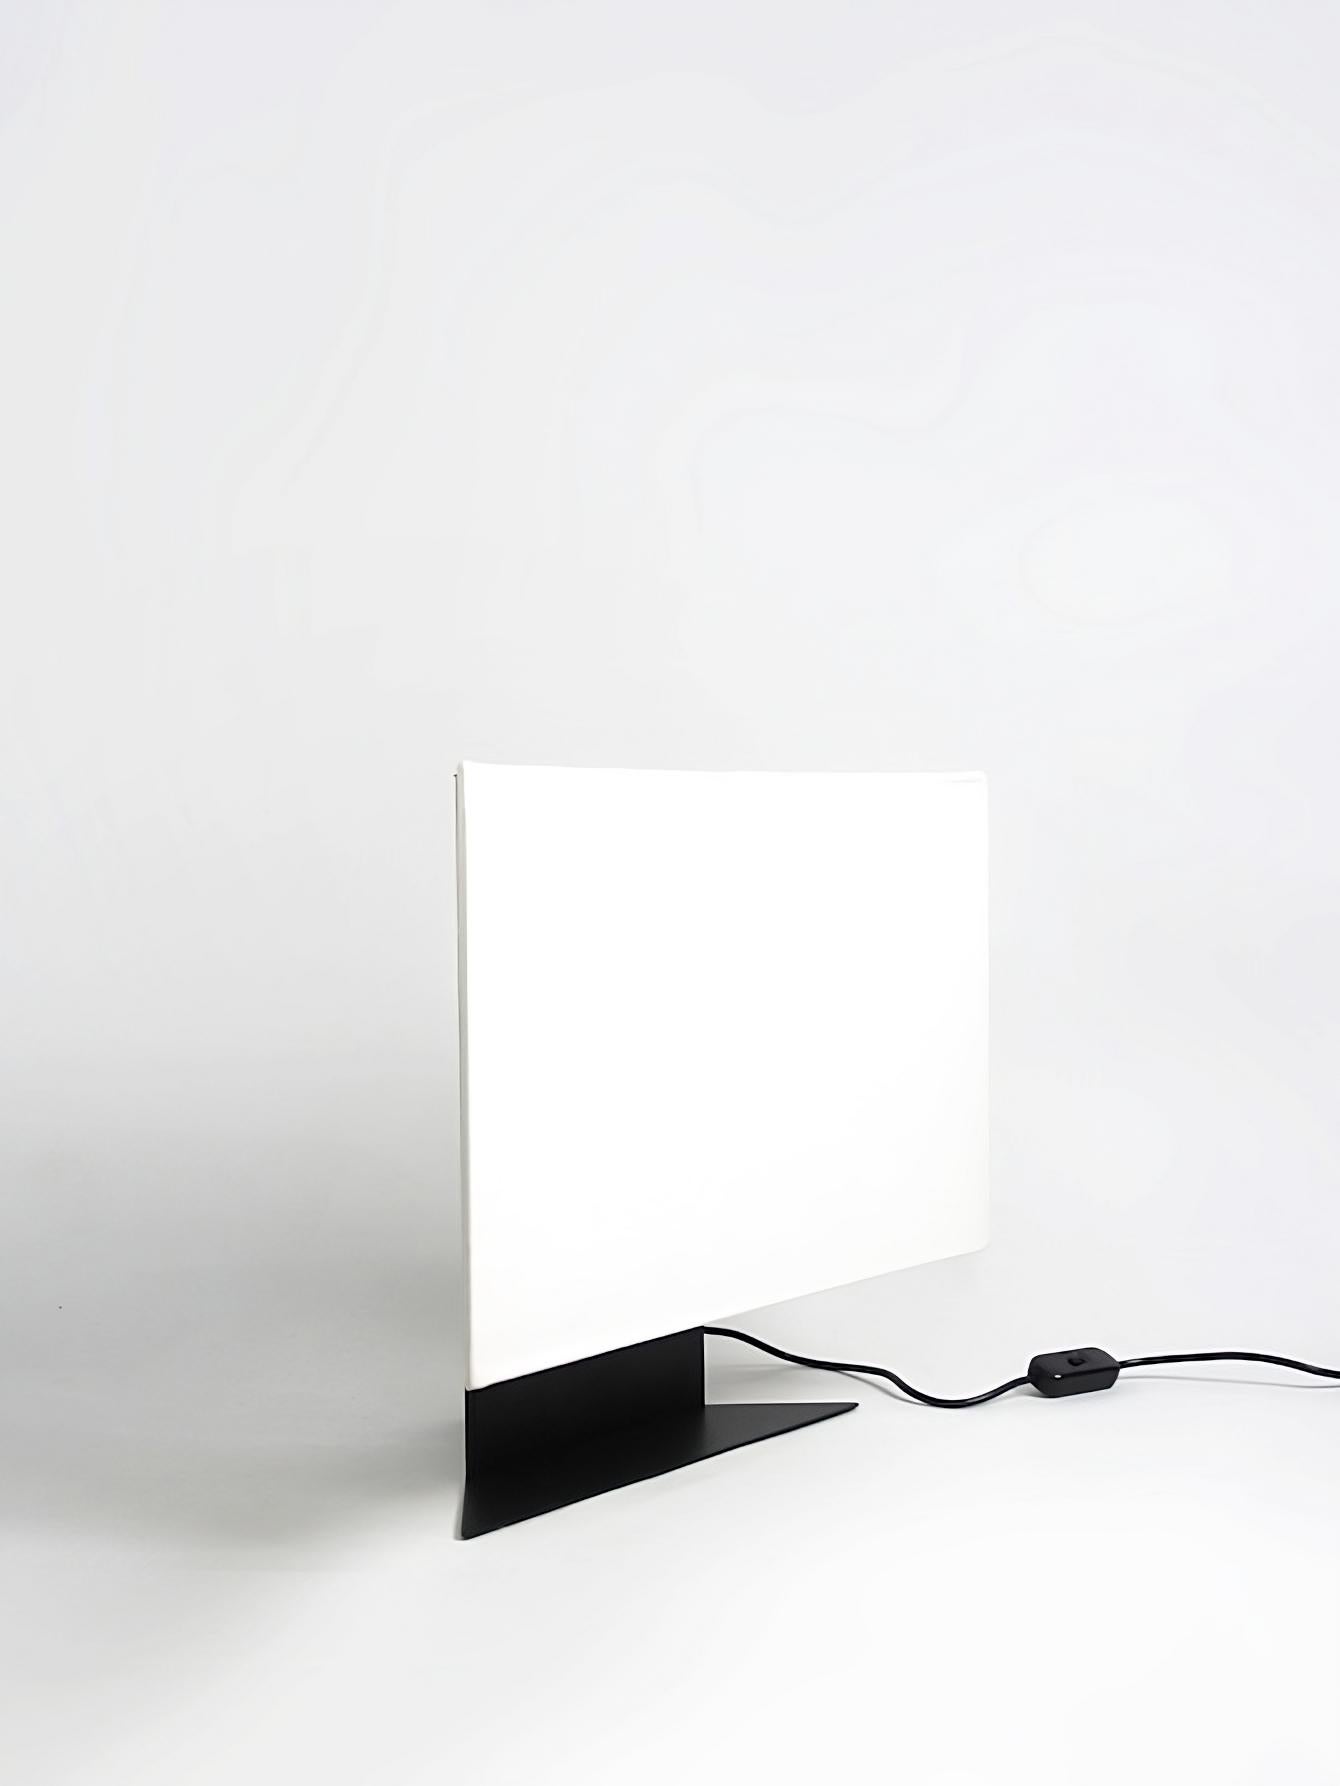 The Accademia lamp, designed by Cini Boeri in 1978, is a small-scale version of the popular table lamp created for Artemide. This lamp is an impressive example of Boeri's minimalist approach to design, with its elegant and refined aesthetics